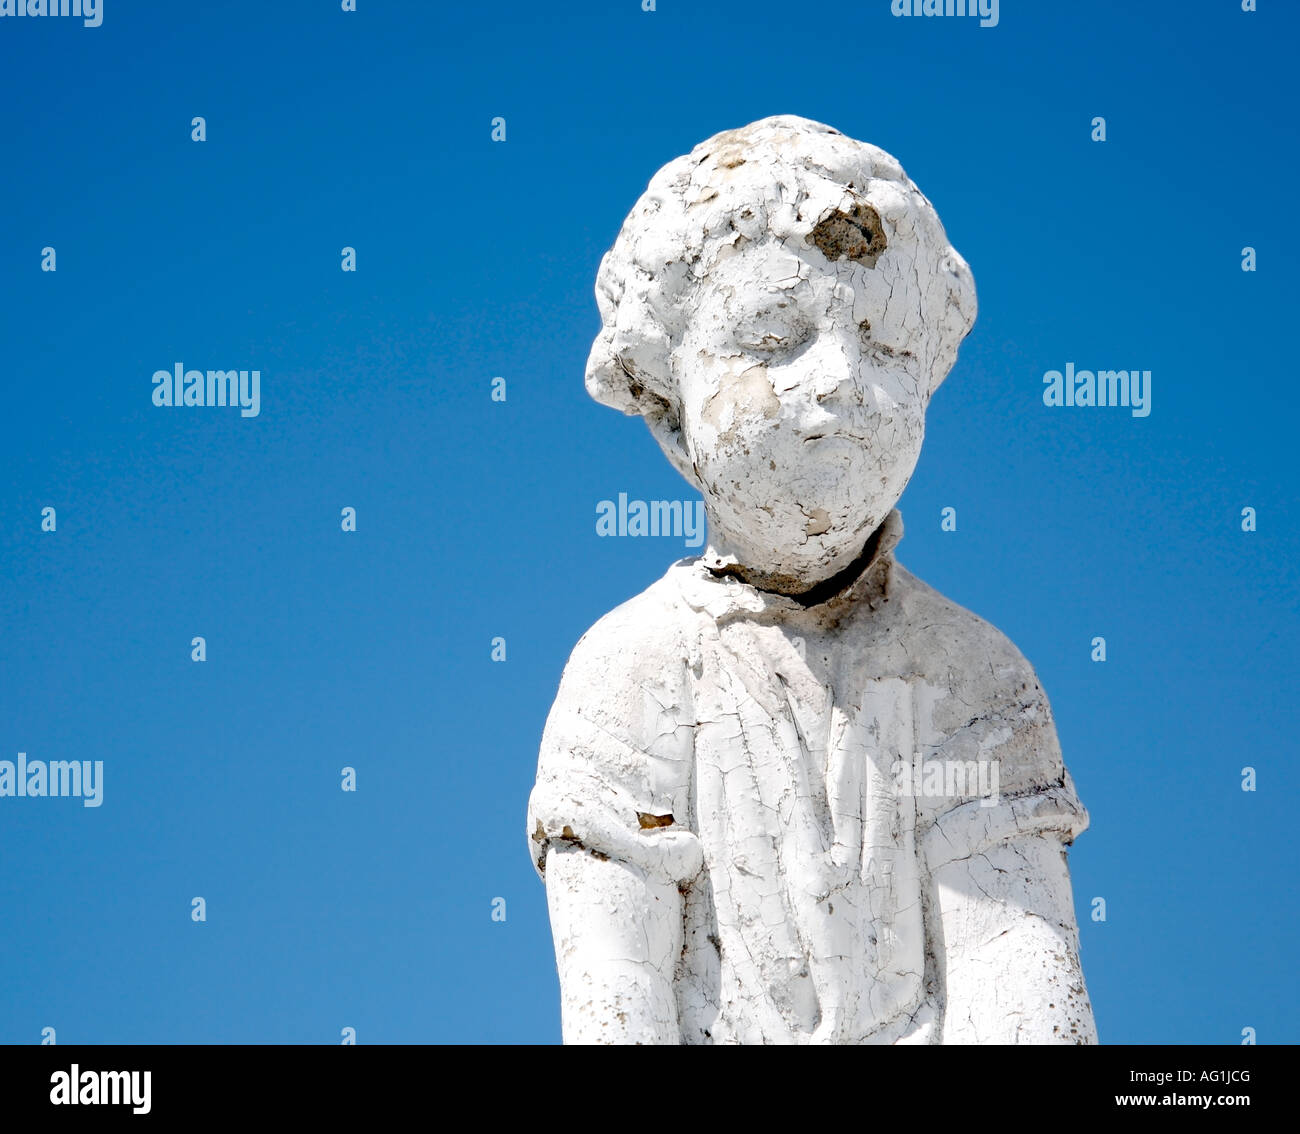 Close up of white stone boy statue in bad condition against a blue sky. Stock Photo